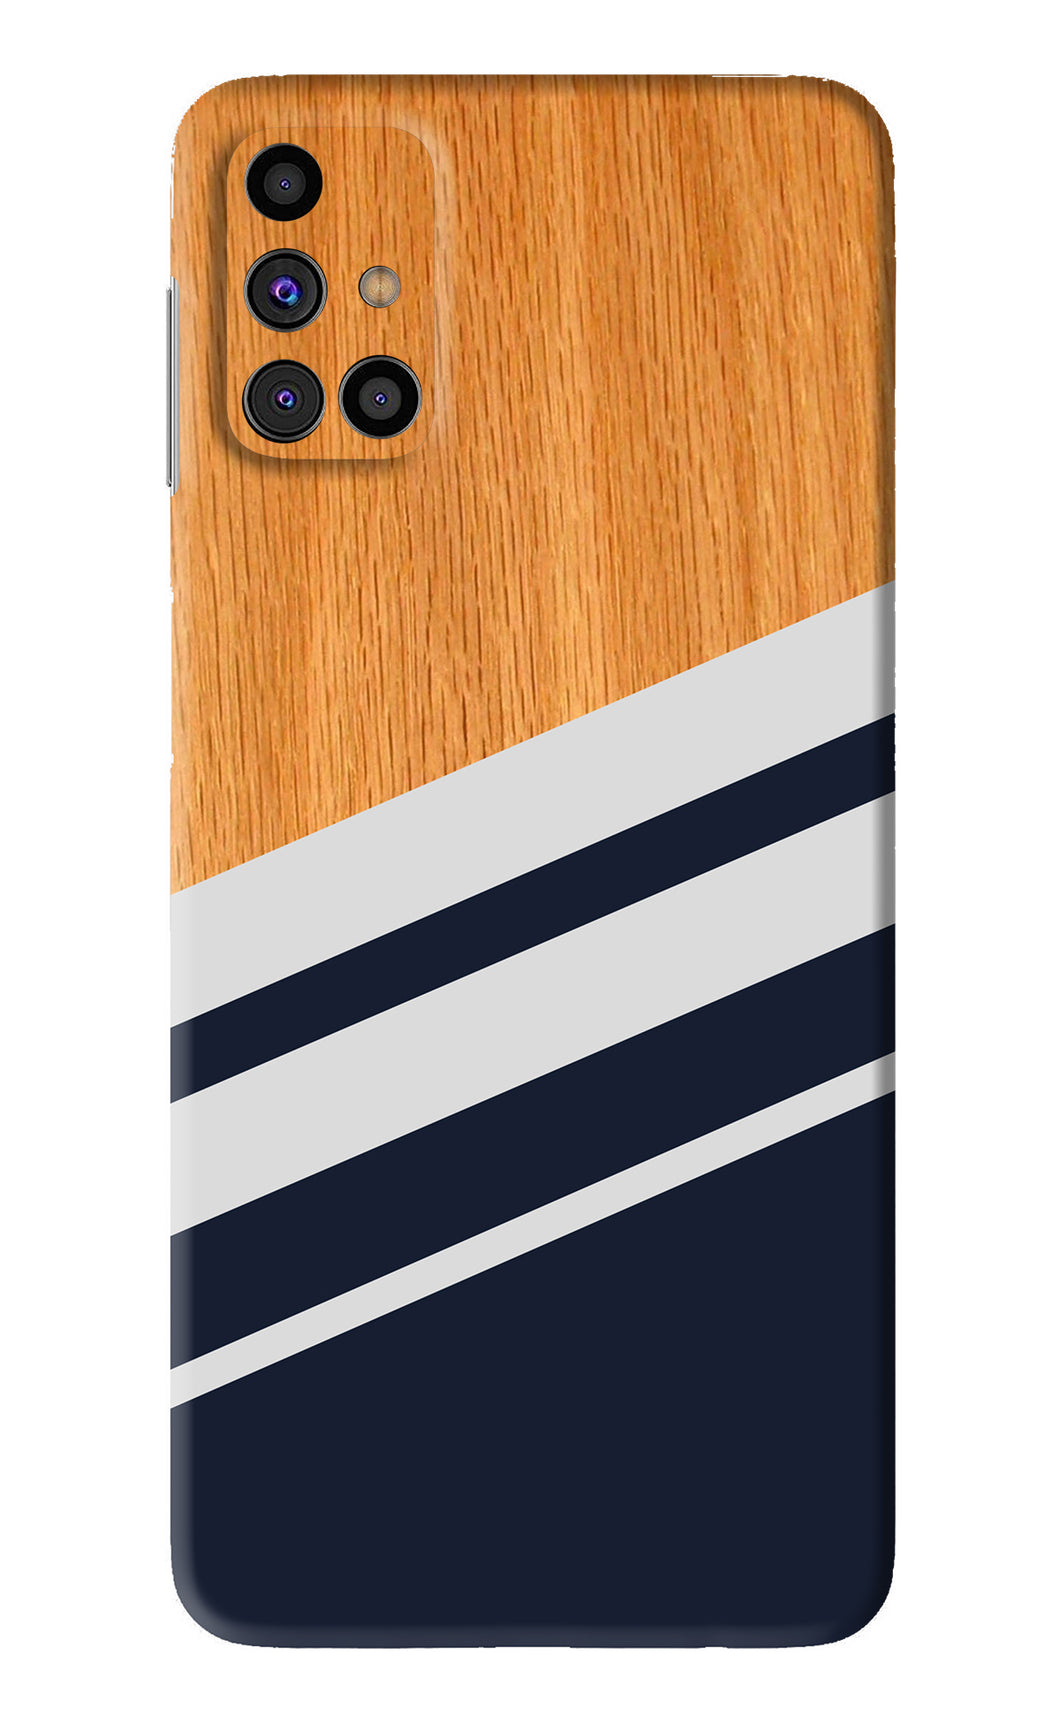 Black And White Wooden Samsung Galaxy M31s Back Skin Wrap